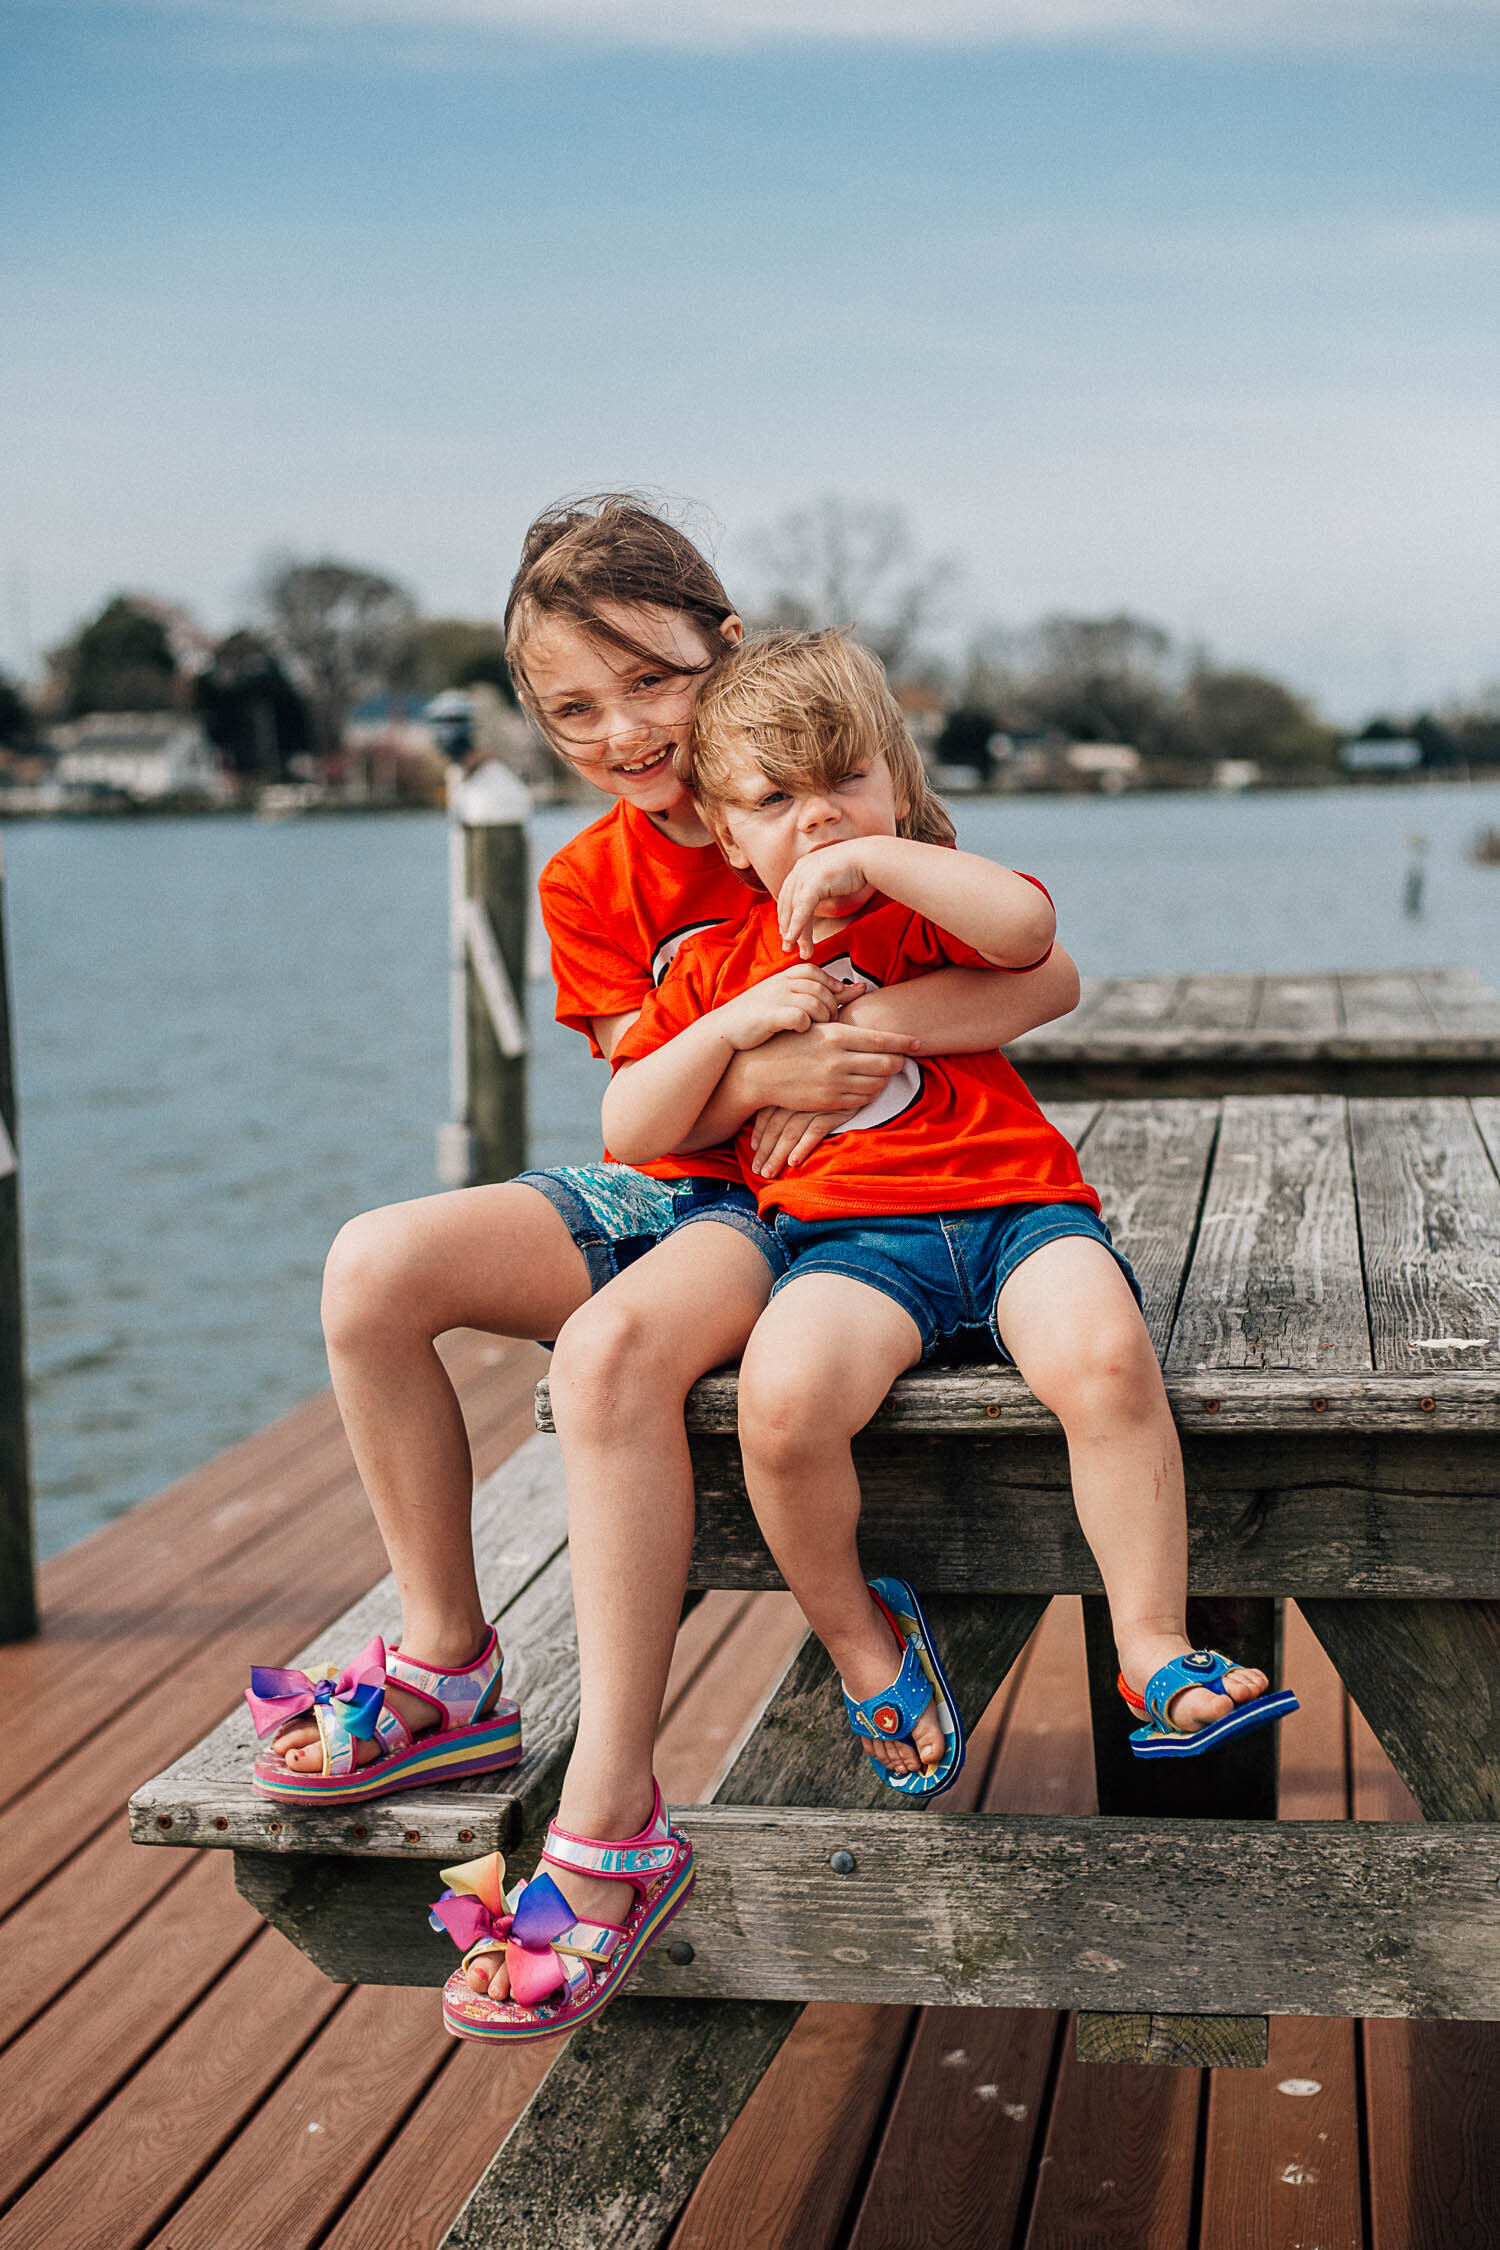 hampton roads photographers family photos with two children sitting on a picnic table on a dock in a lake hugging each other